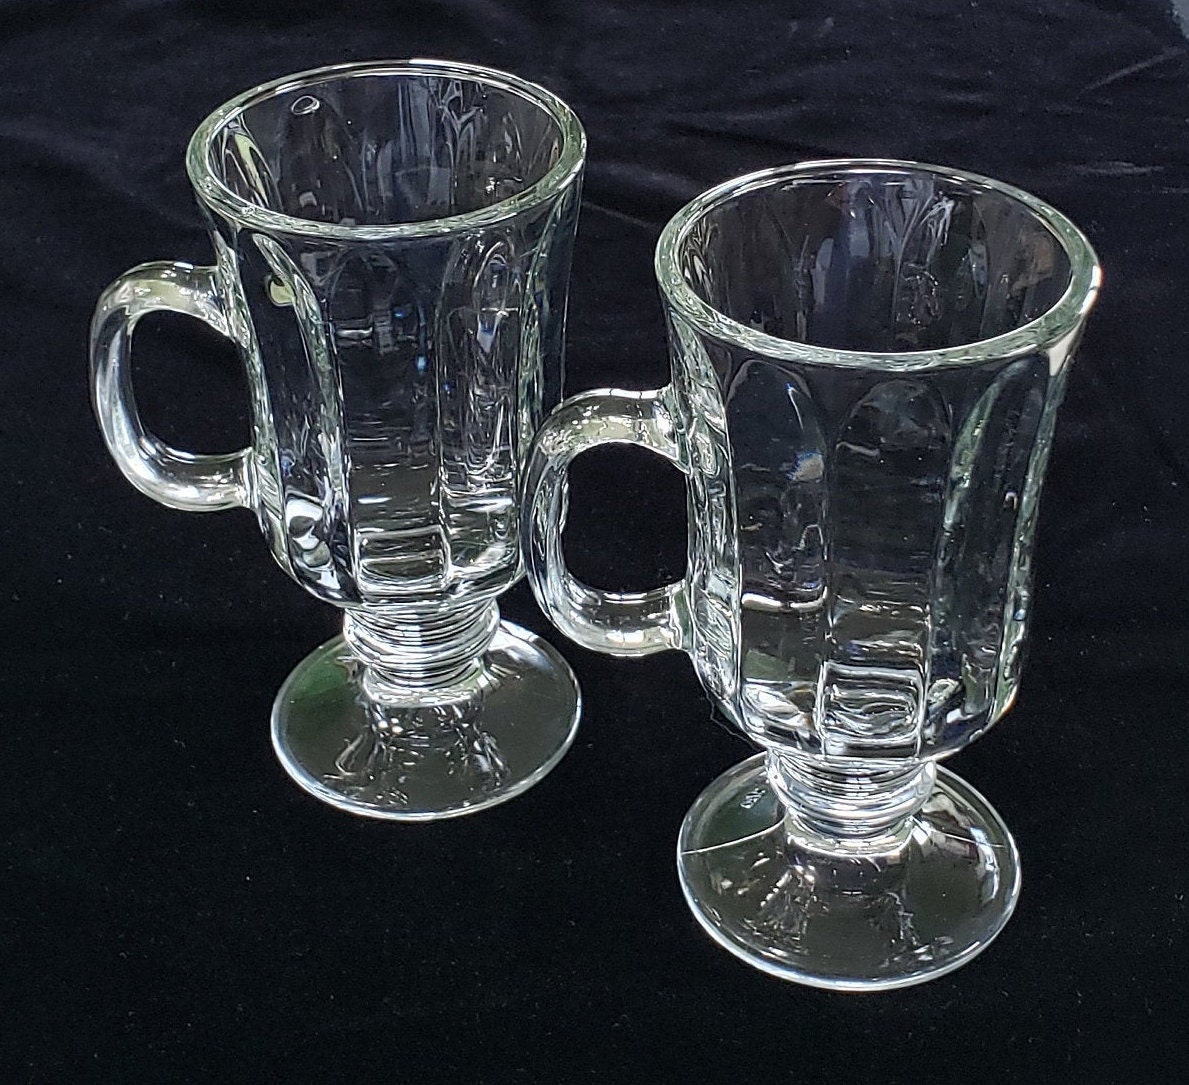 Crystalia Set of 2 Irish Coffee, Latte, Cappuccino and Hot Chocolate Glass Mugs with Handle, 7 3/4 oz, Clear